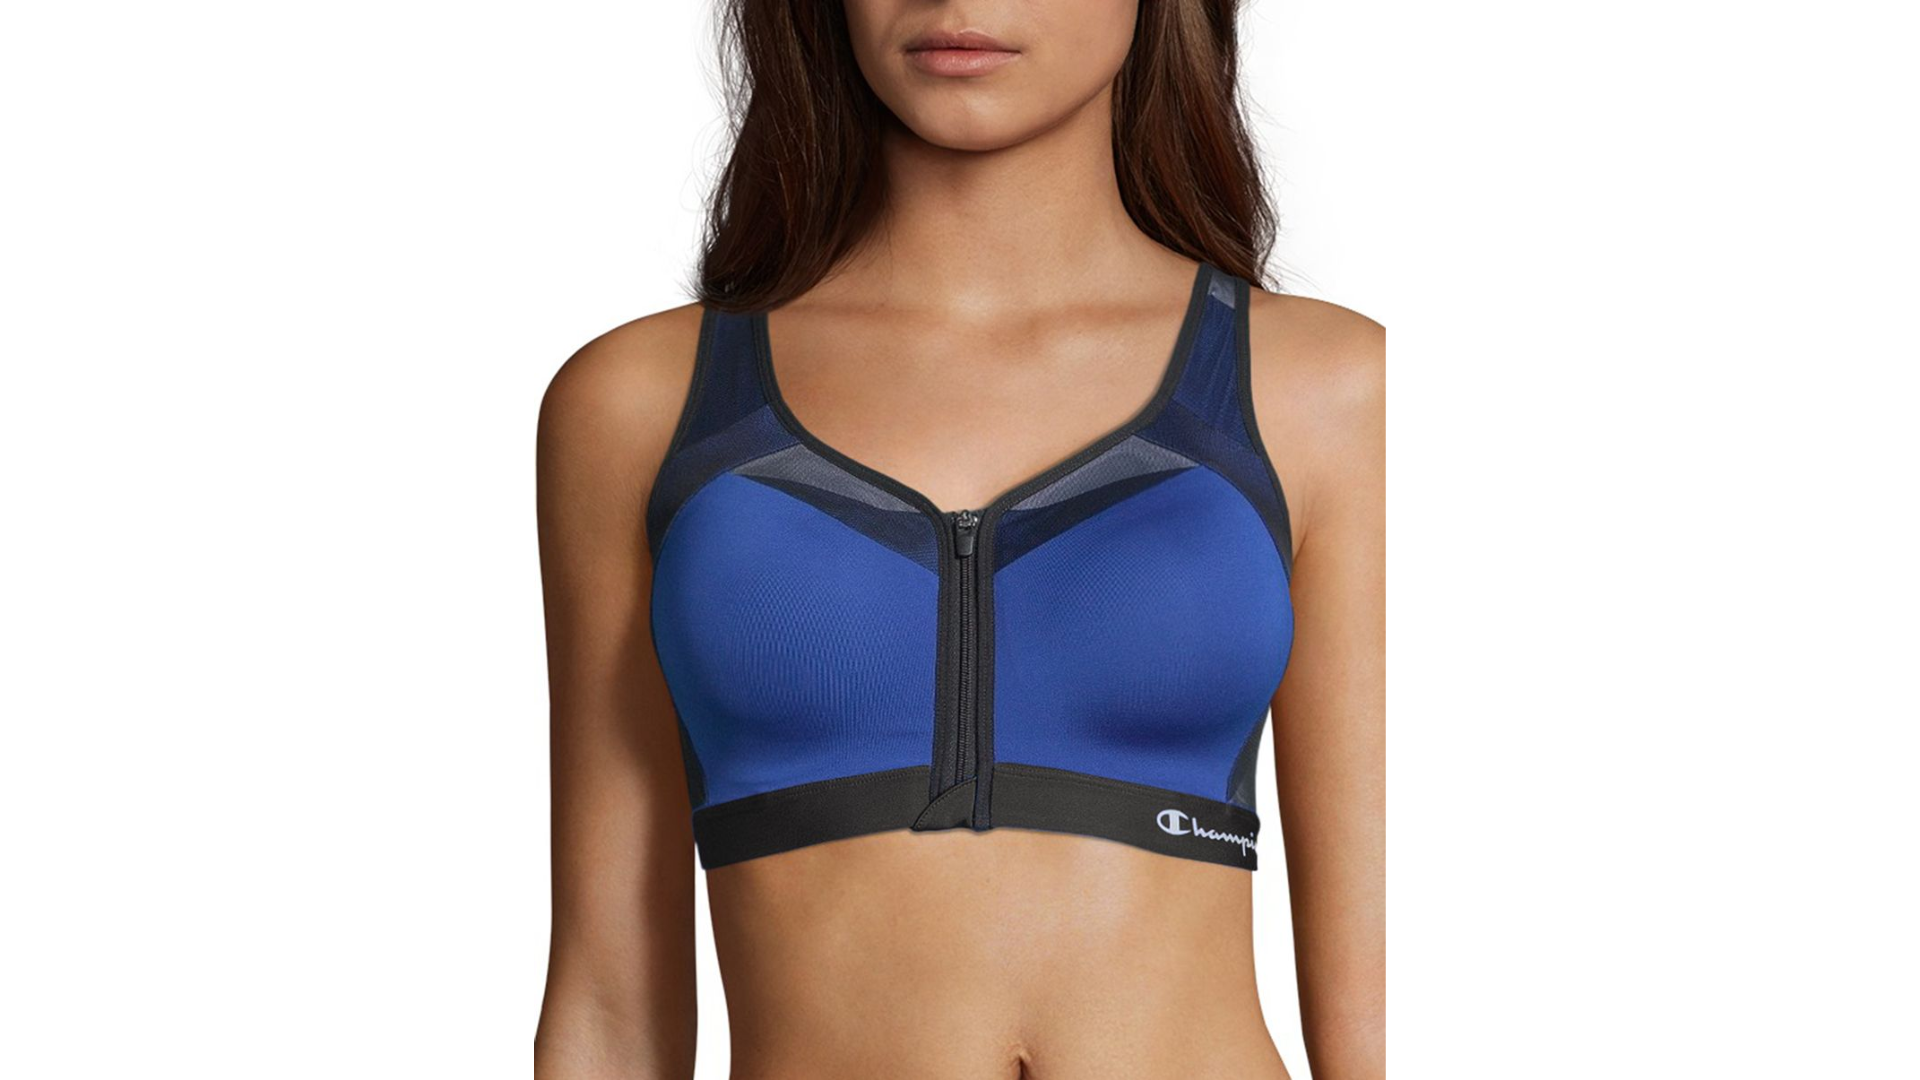 Champion Womens Motion Control Zip Front Sports Bra, 38B, Surf The